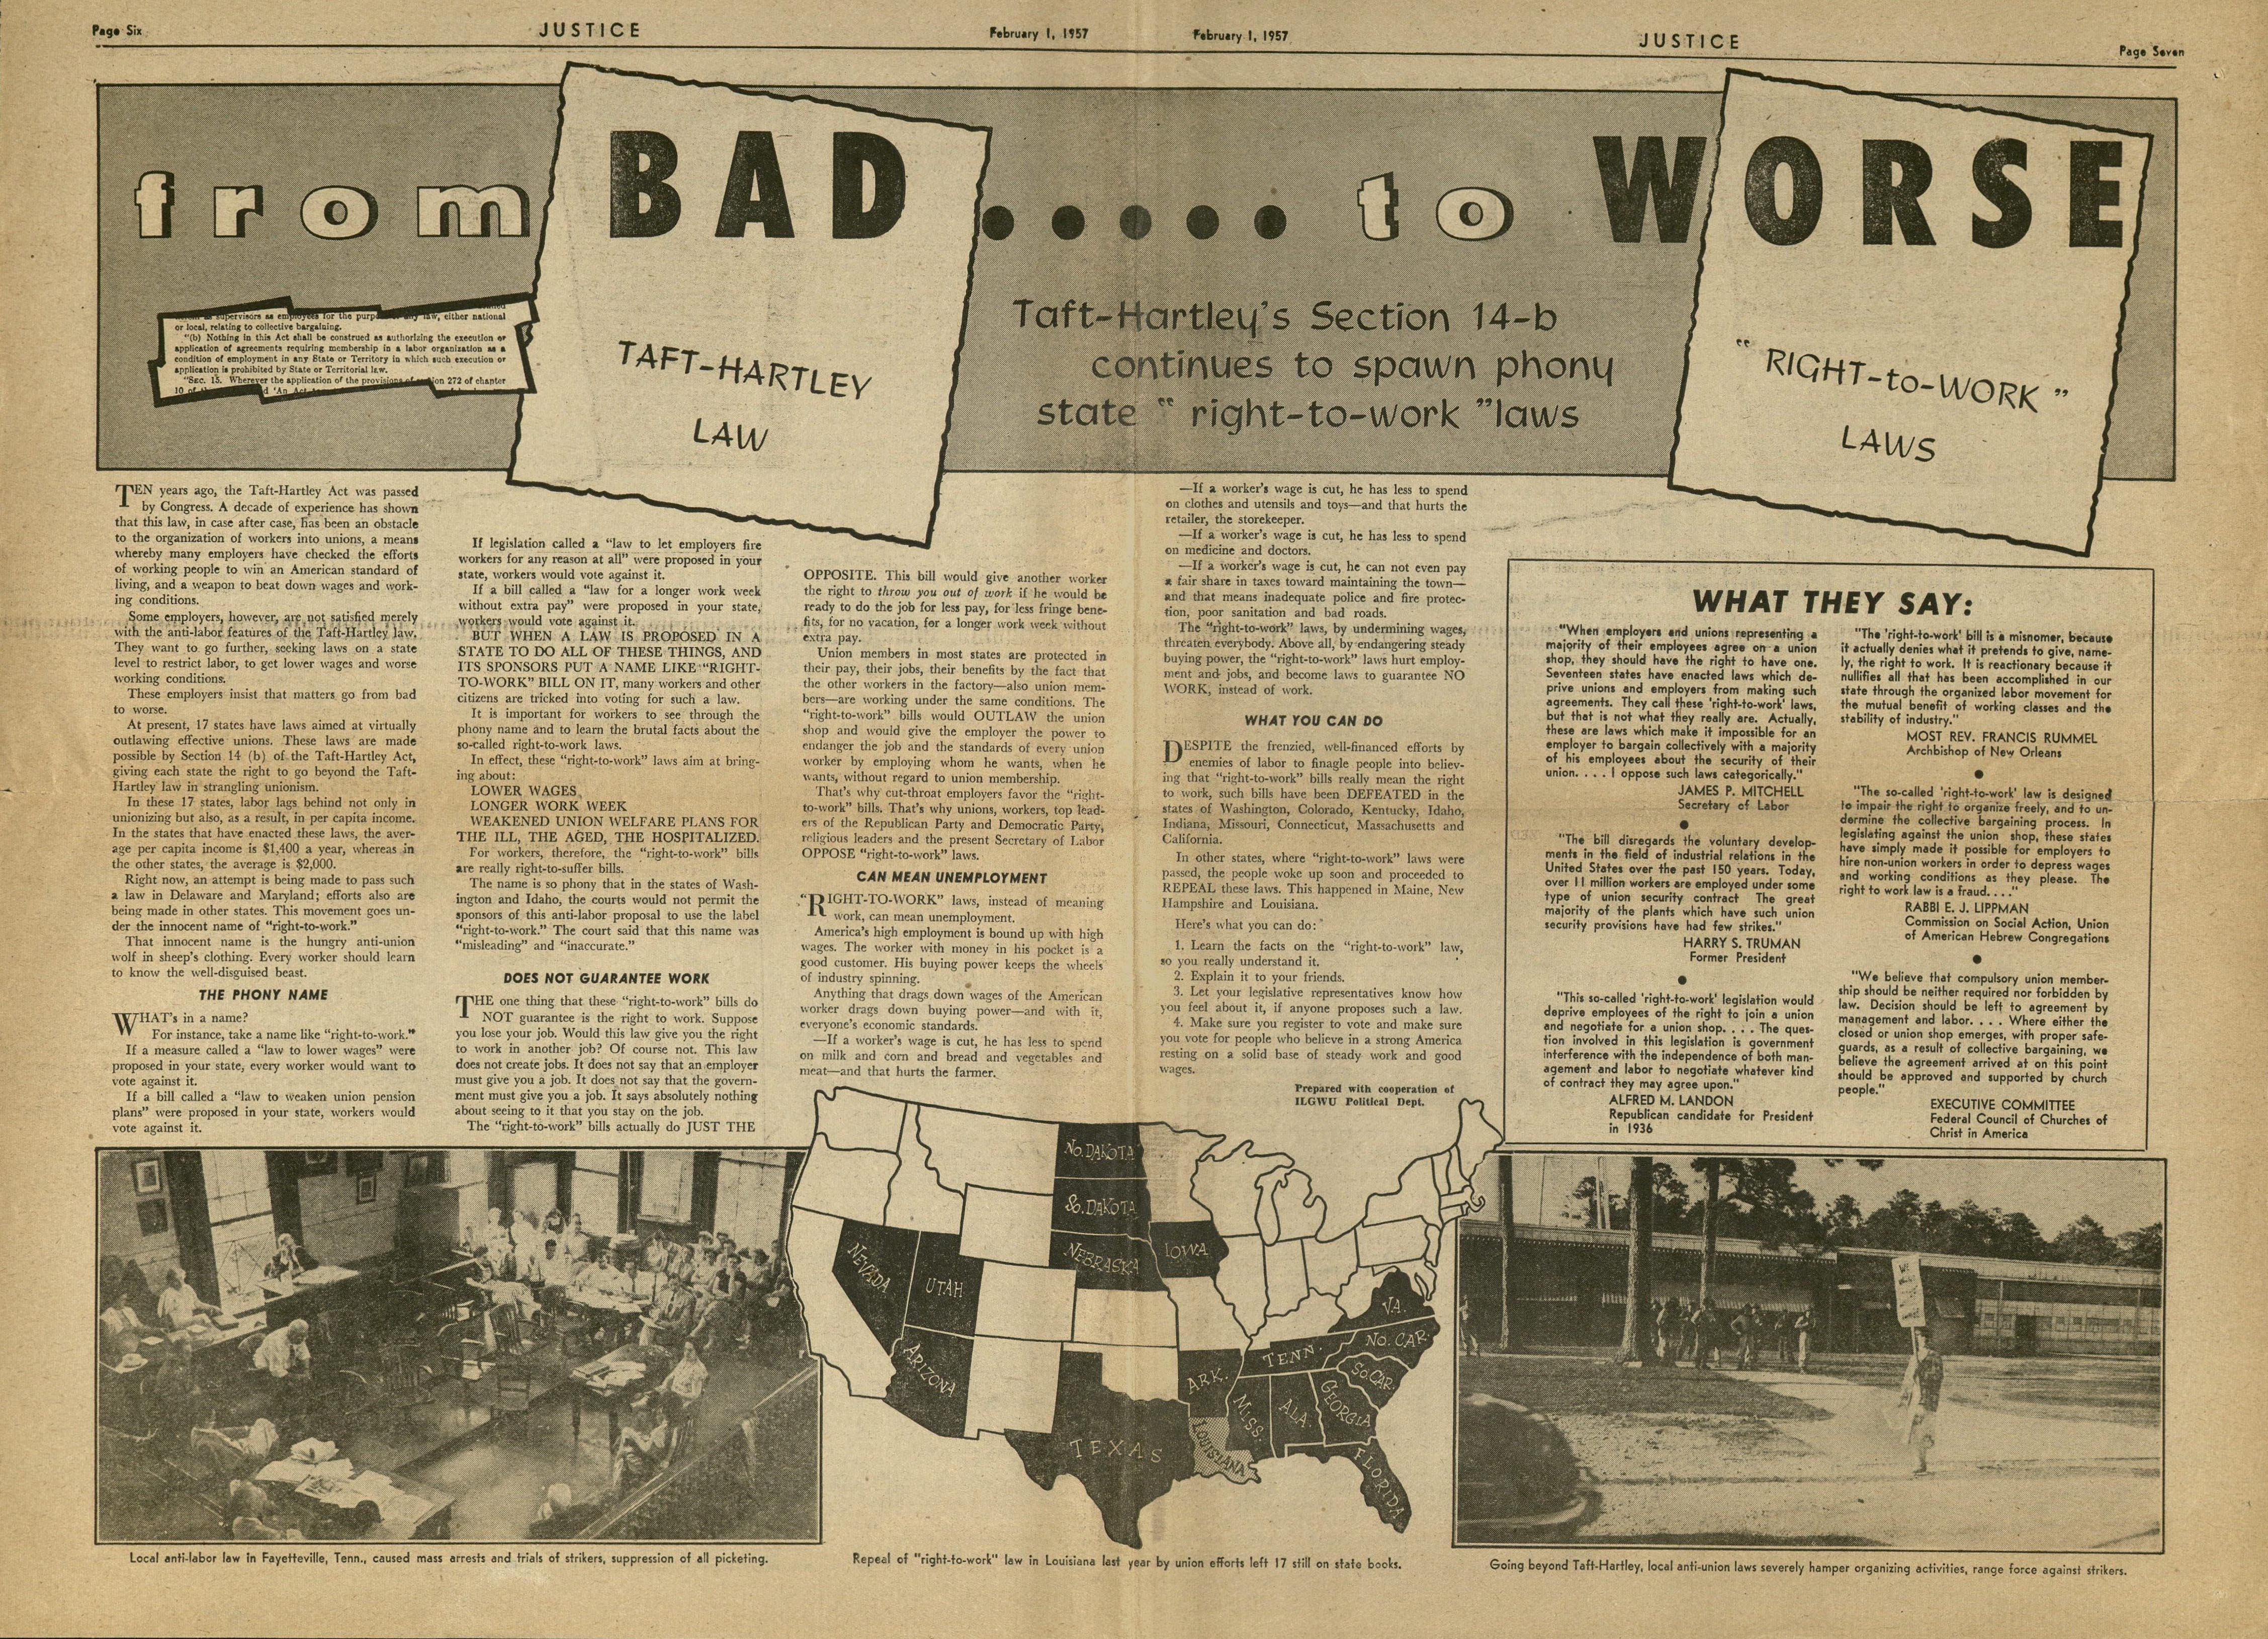 Double-page spread of an article on Right to Work laws